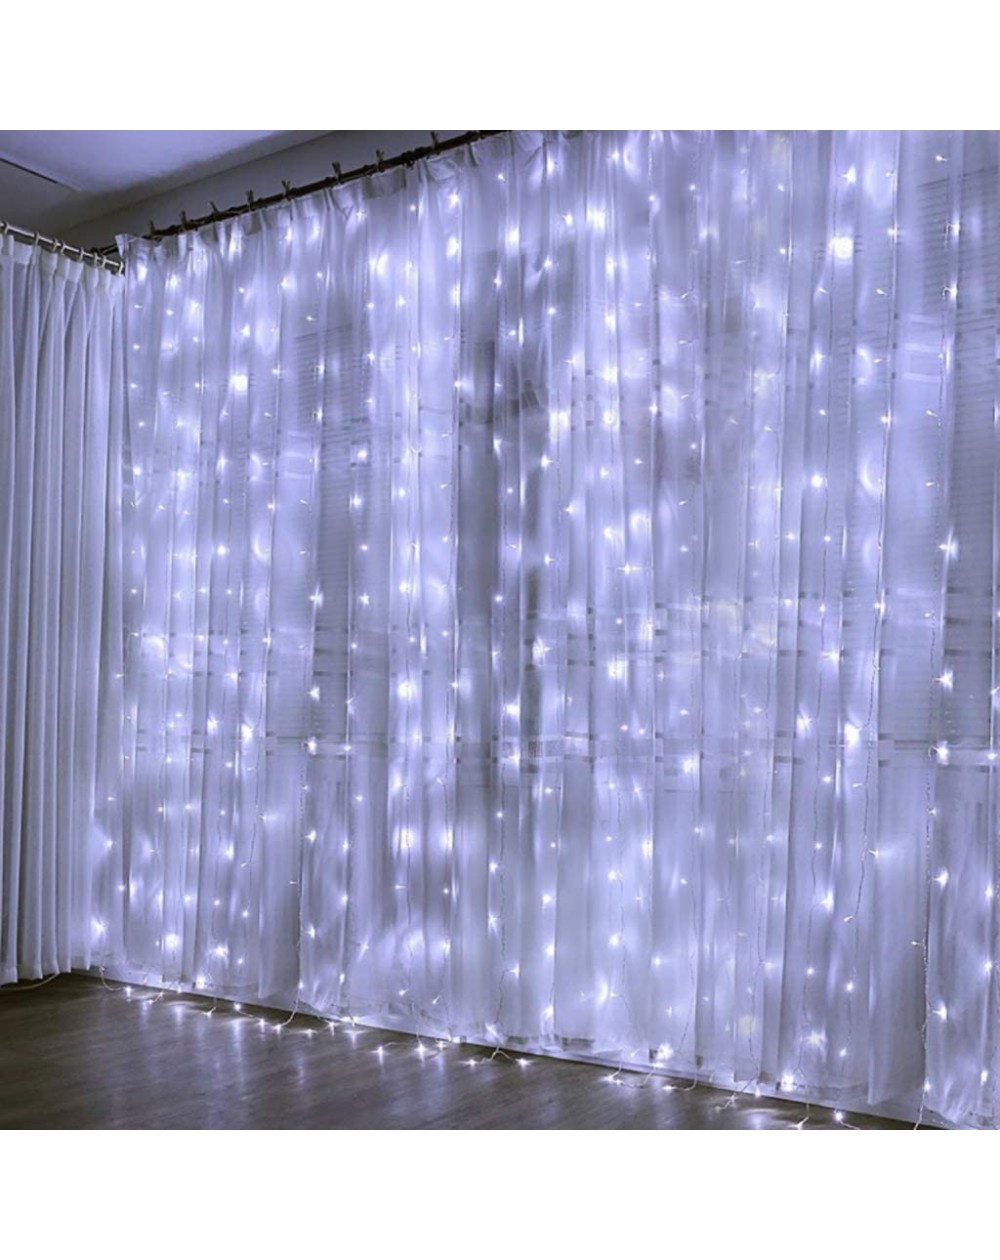 Outdoor String Lights White Curtain Lights- 6.6x10ft 300 LED String Lights USB Powered- 8 Modes Remote- Waterproof- Pasteable...